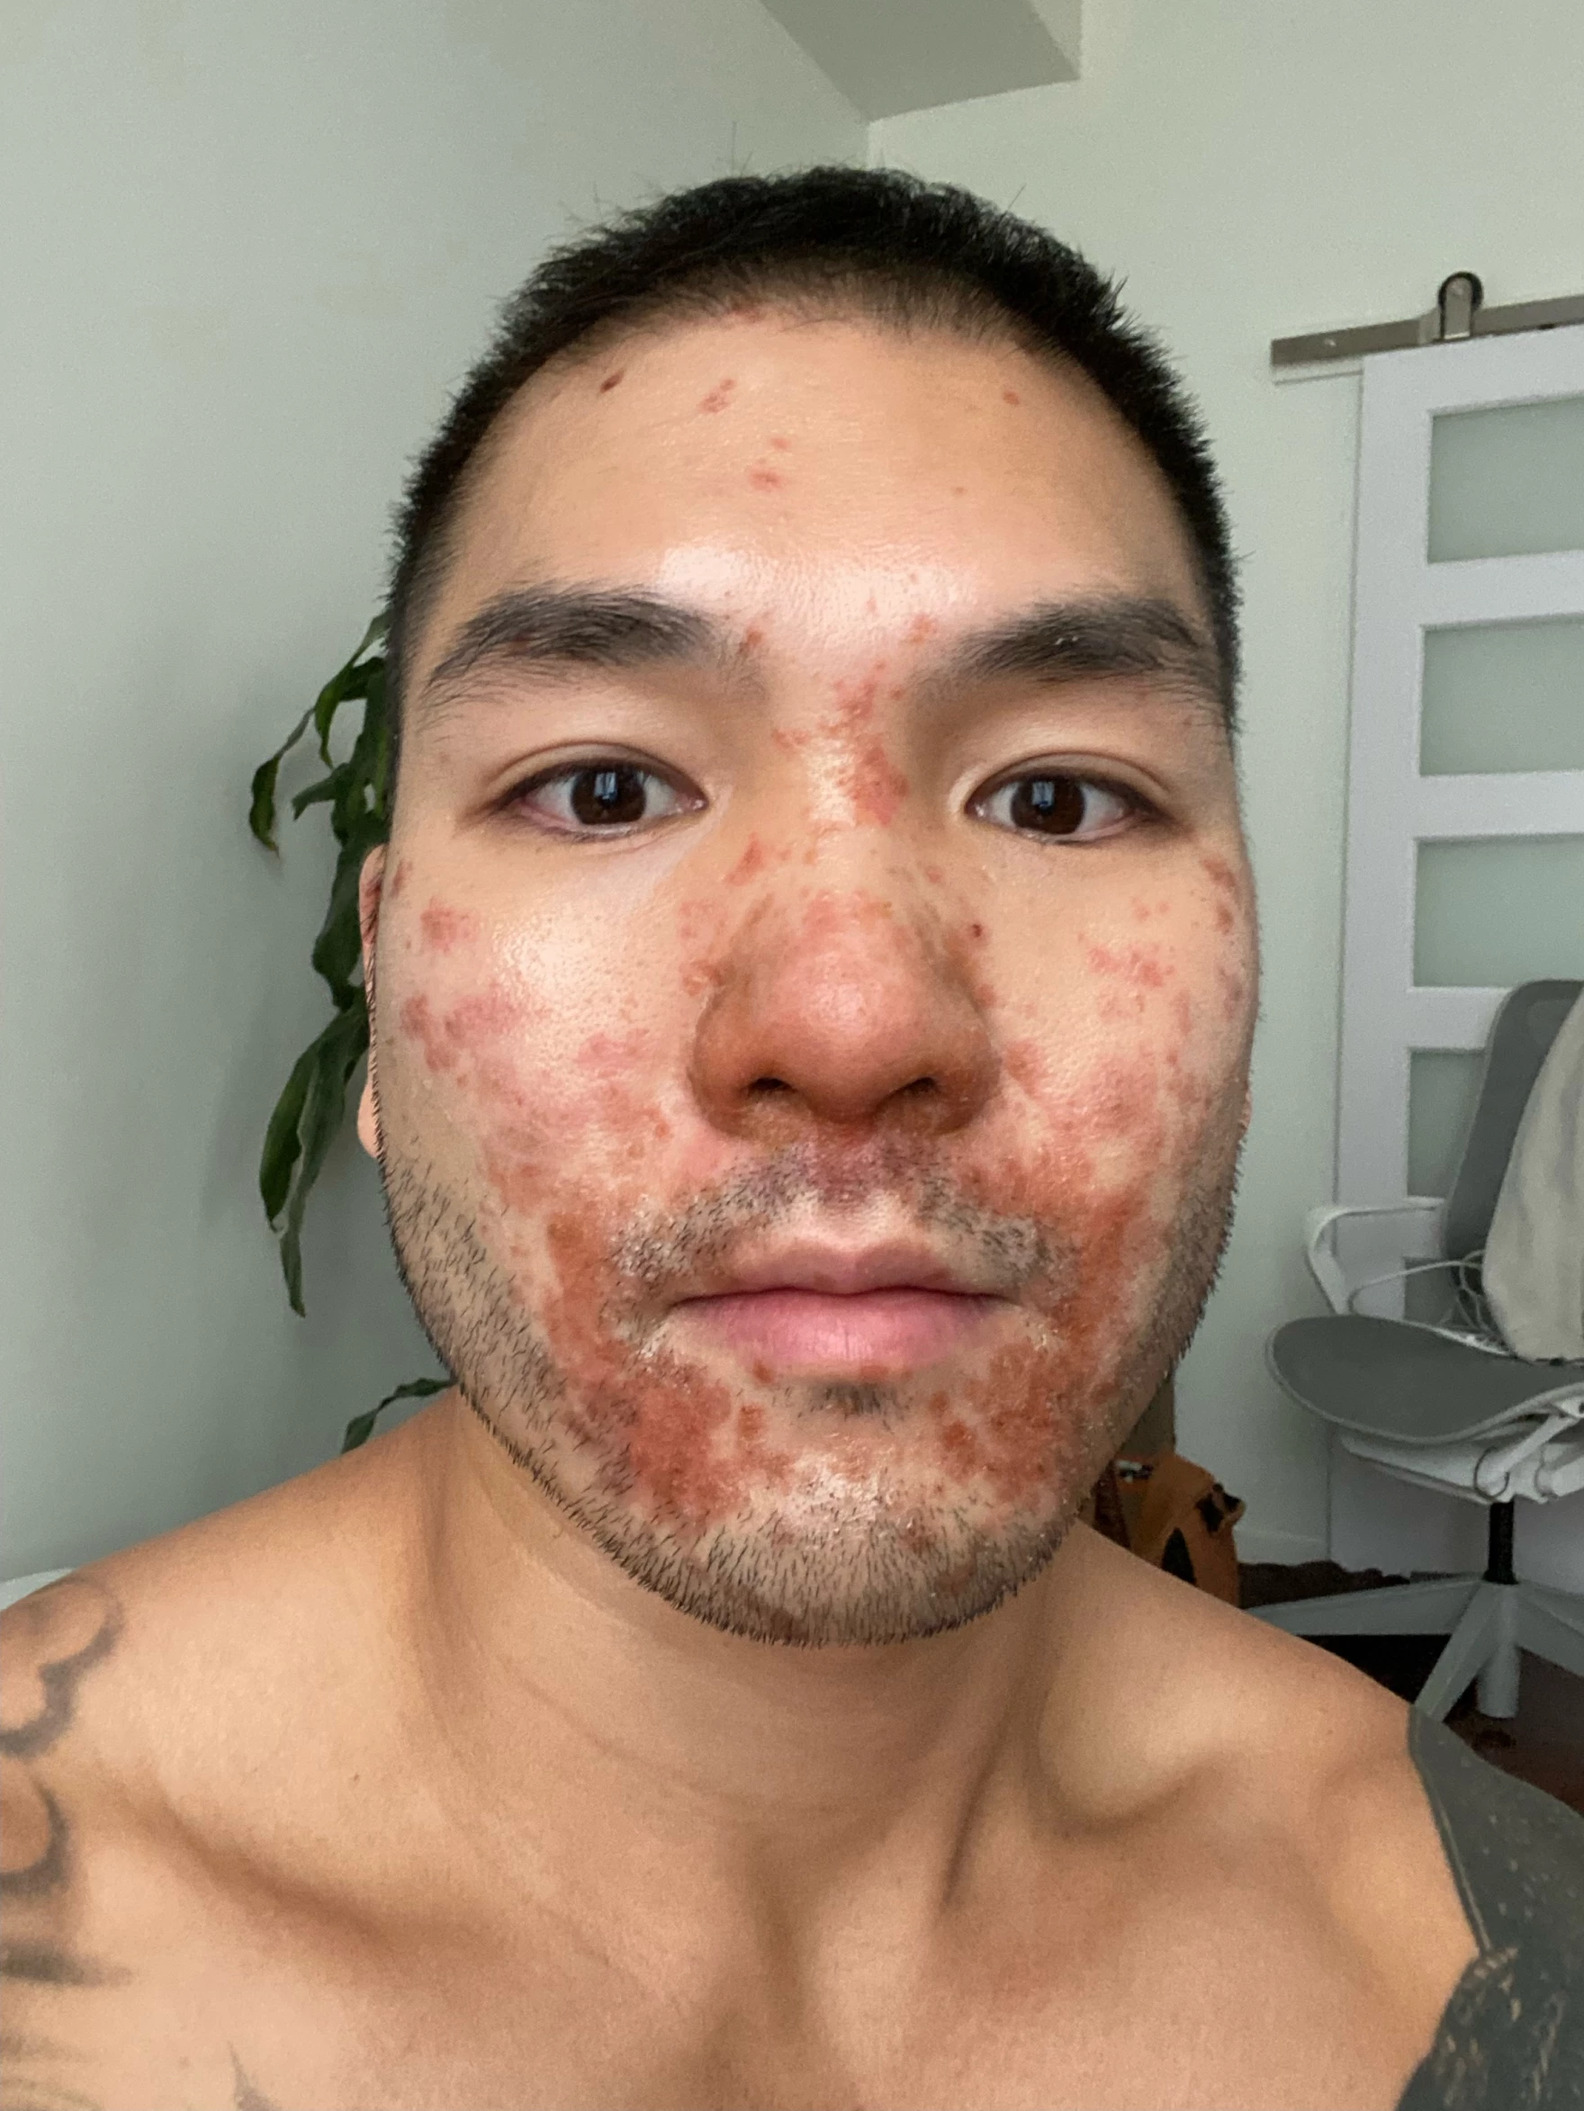 Houston man with monkeypox on face believes a kiss caused it